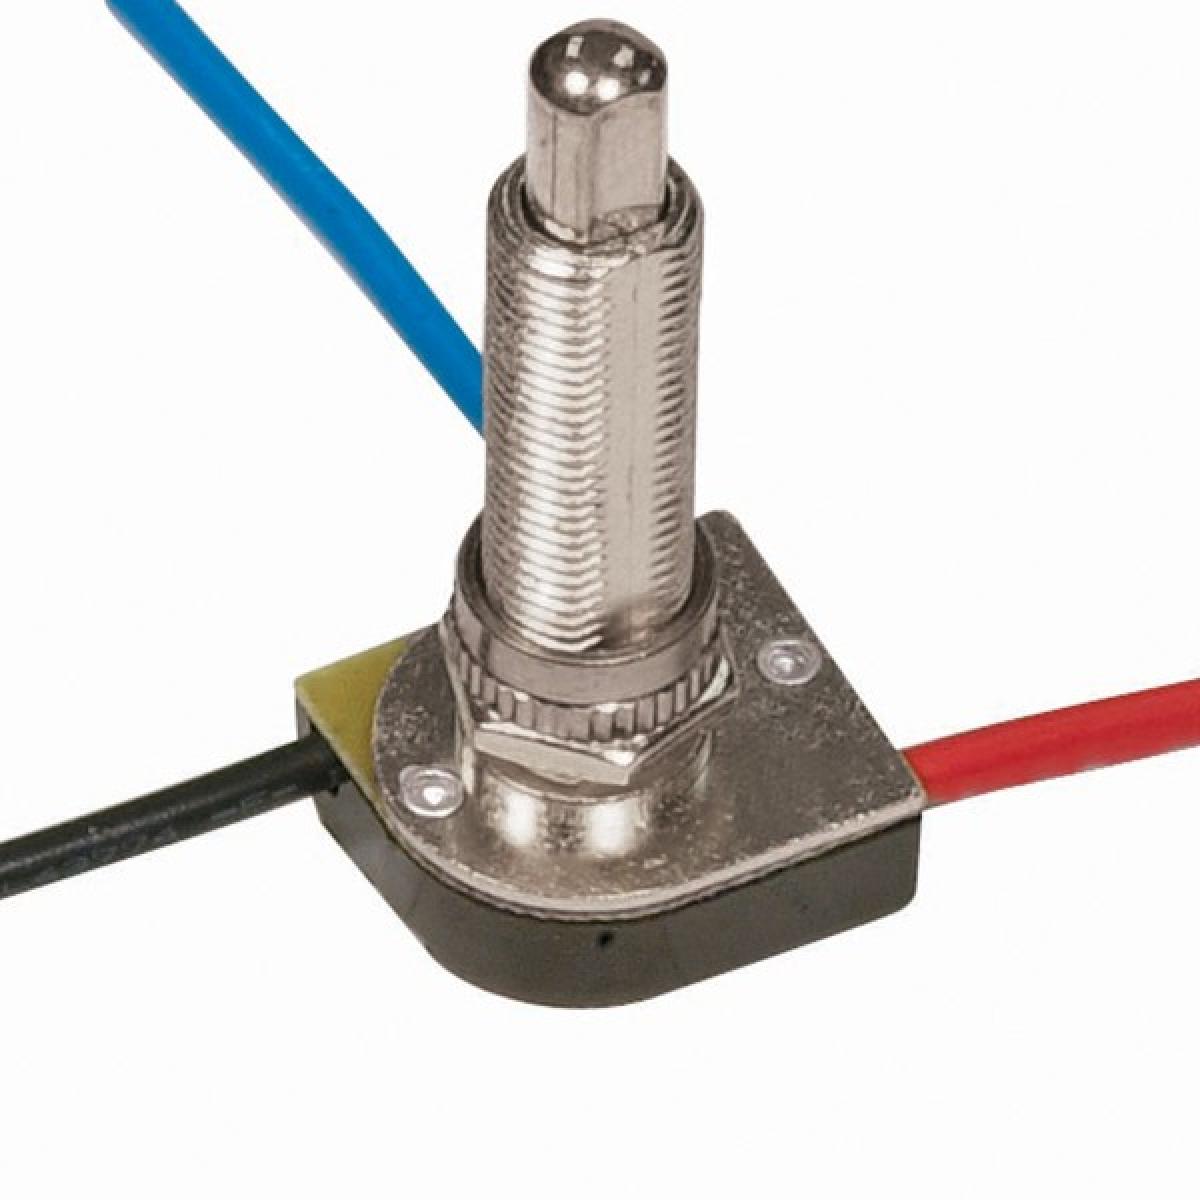 Satco 80-1370 3-Way Metal Push Switch, Metal Bushing, 2 Circuit, 4 Position(L-1, L-2, L1-2, Off). Rated: 6A-125V, 3A-250V